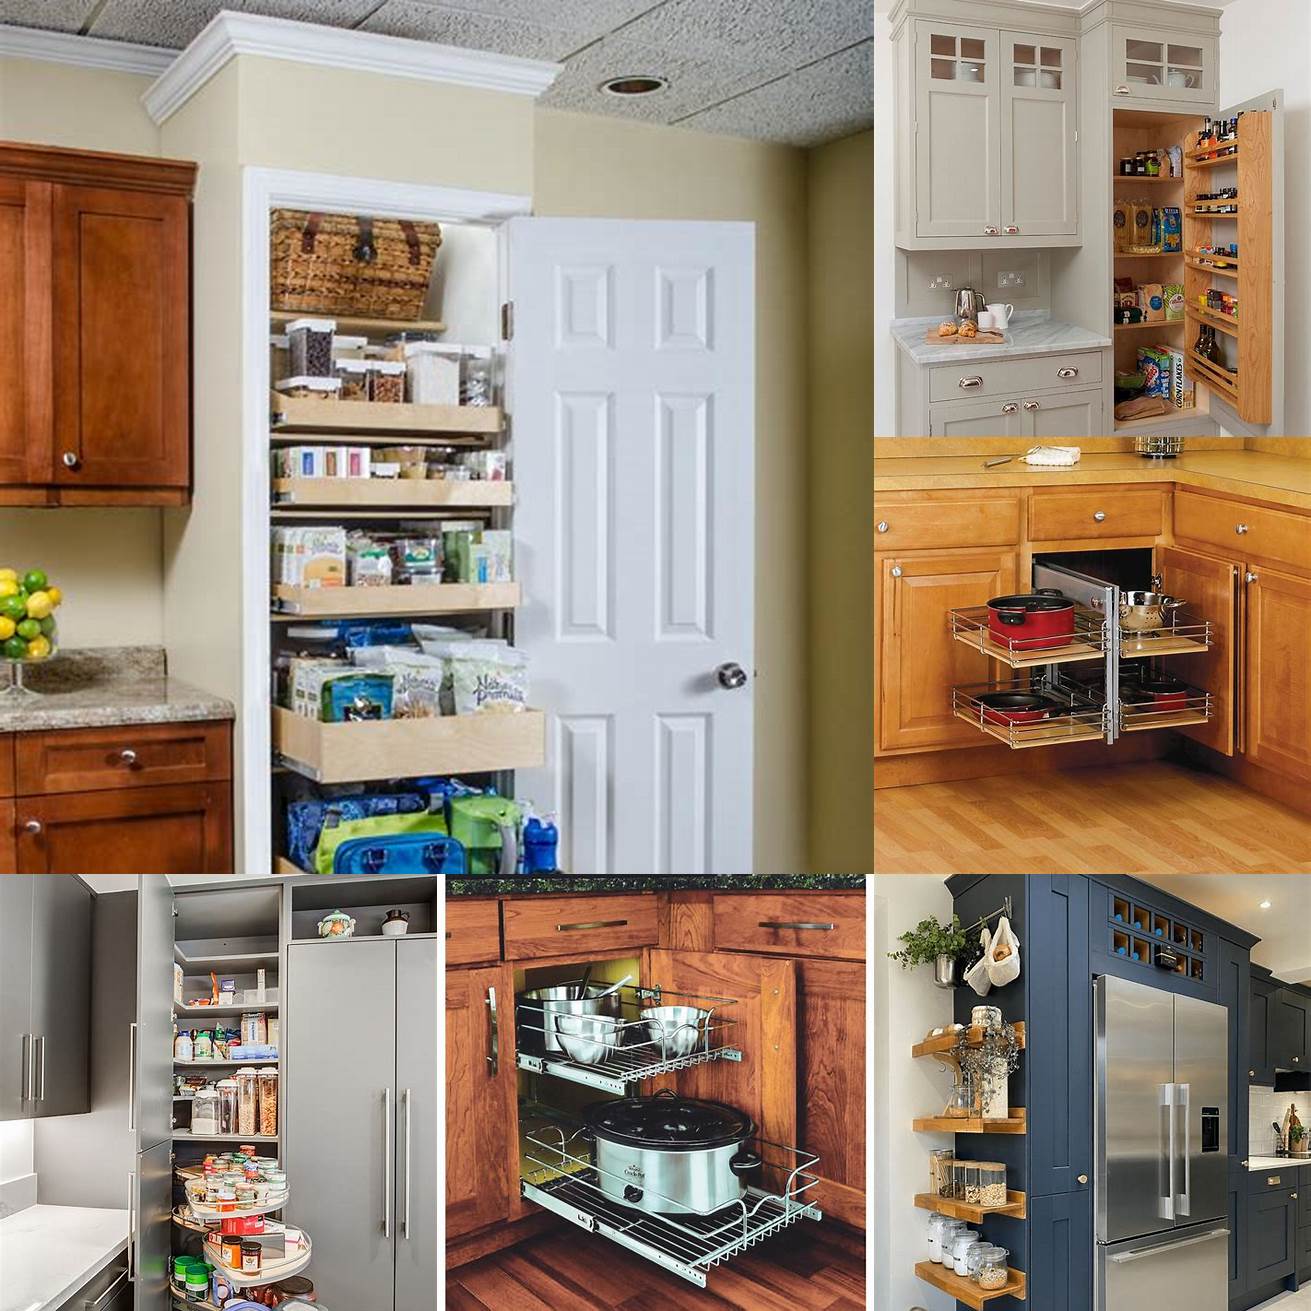 3 Maximize storage and functionality Make sure you have enough storage for all your kitchen items and consider adding features like pull-out pantry shelves or a built-in recycling center